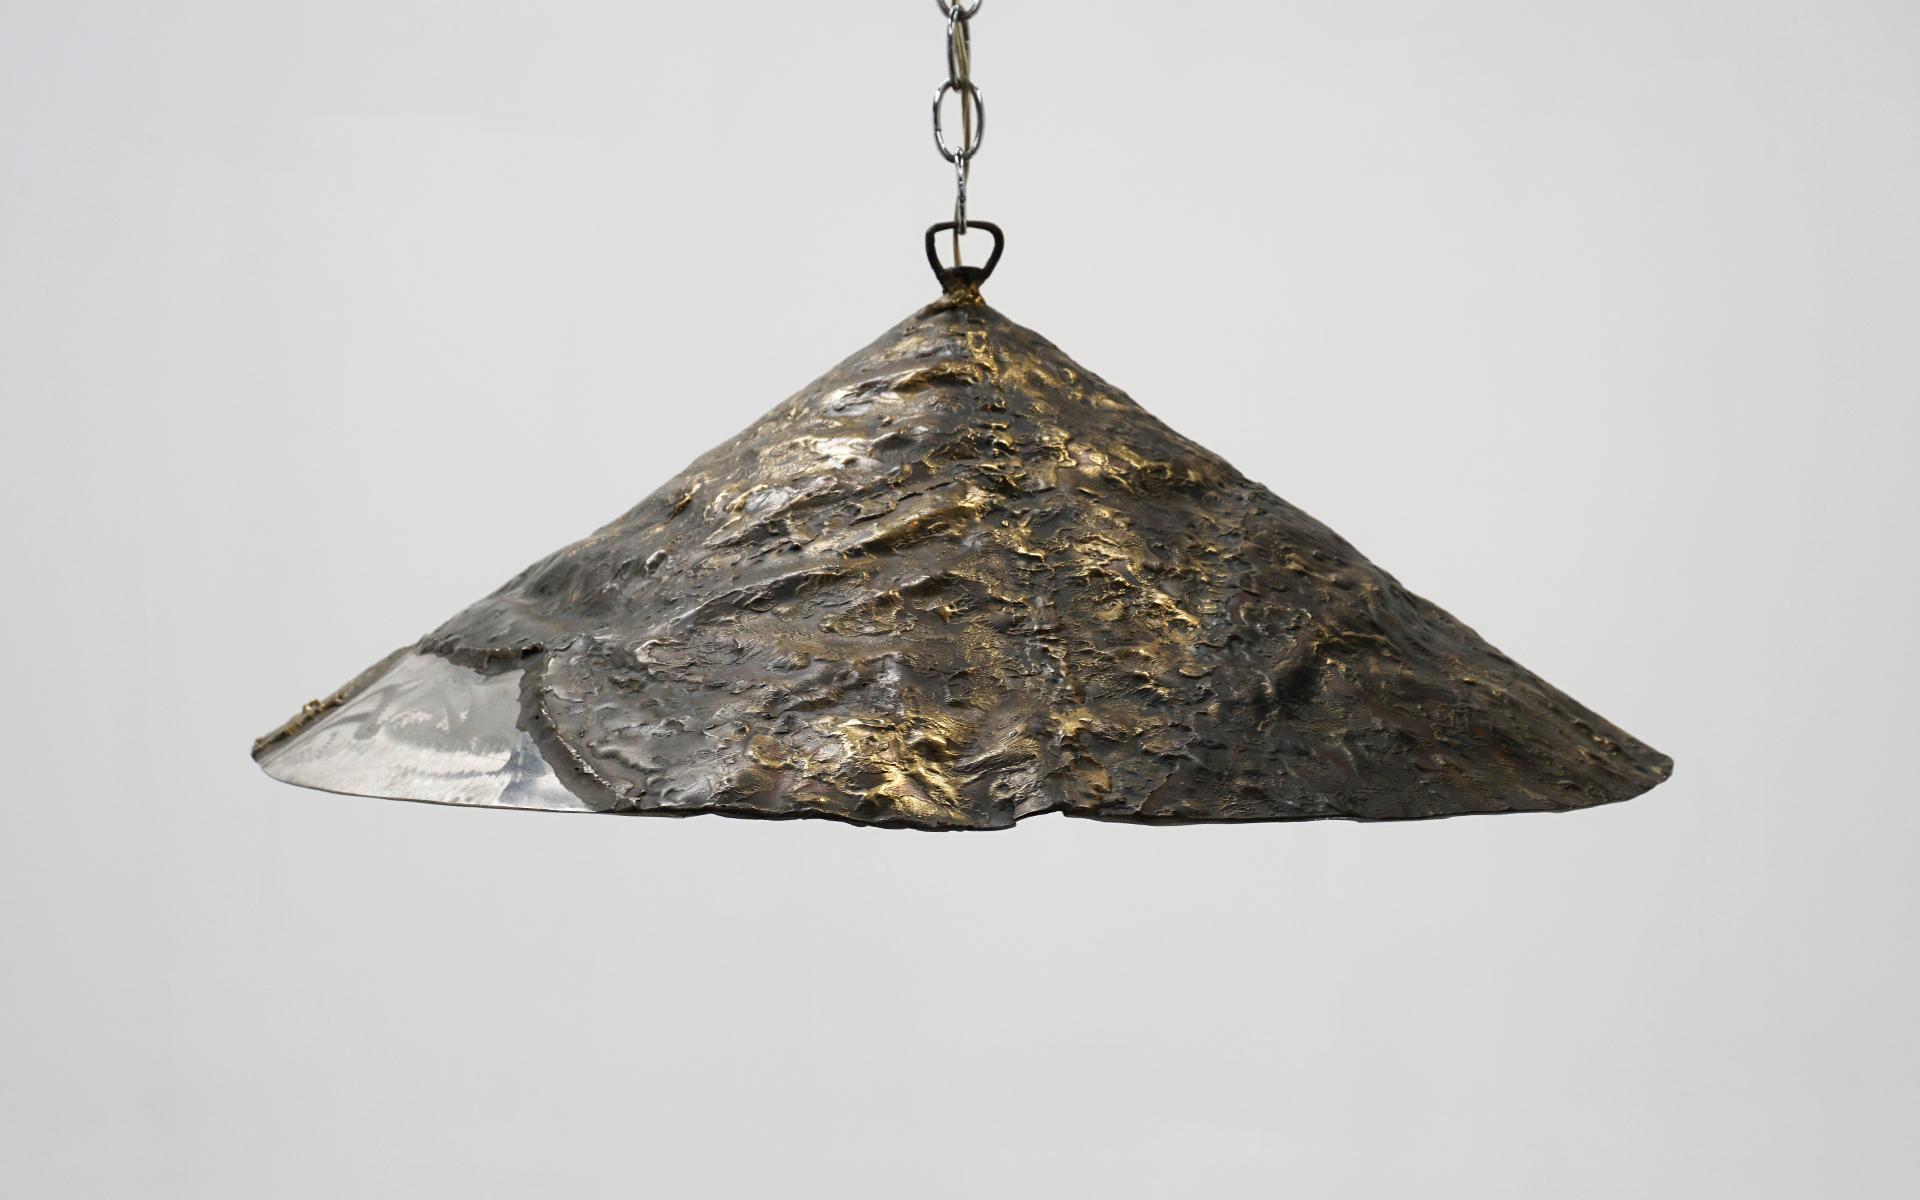 Signed Silas Seandel pendant light fixture or swag lamp, 1974, New York, New York. Brutalist form in solid brass and aluminum. This is a unique one of a kind piece. Signature is etched into the brass.